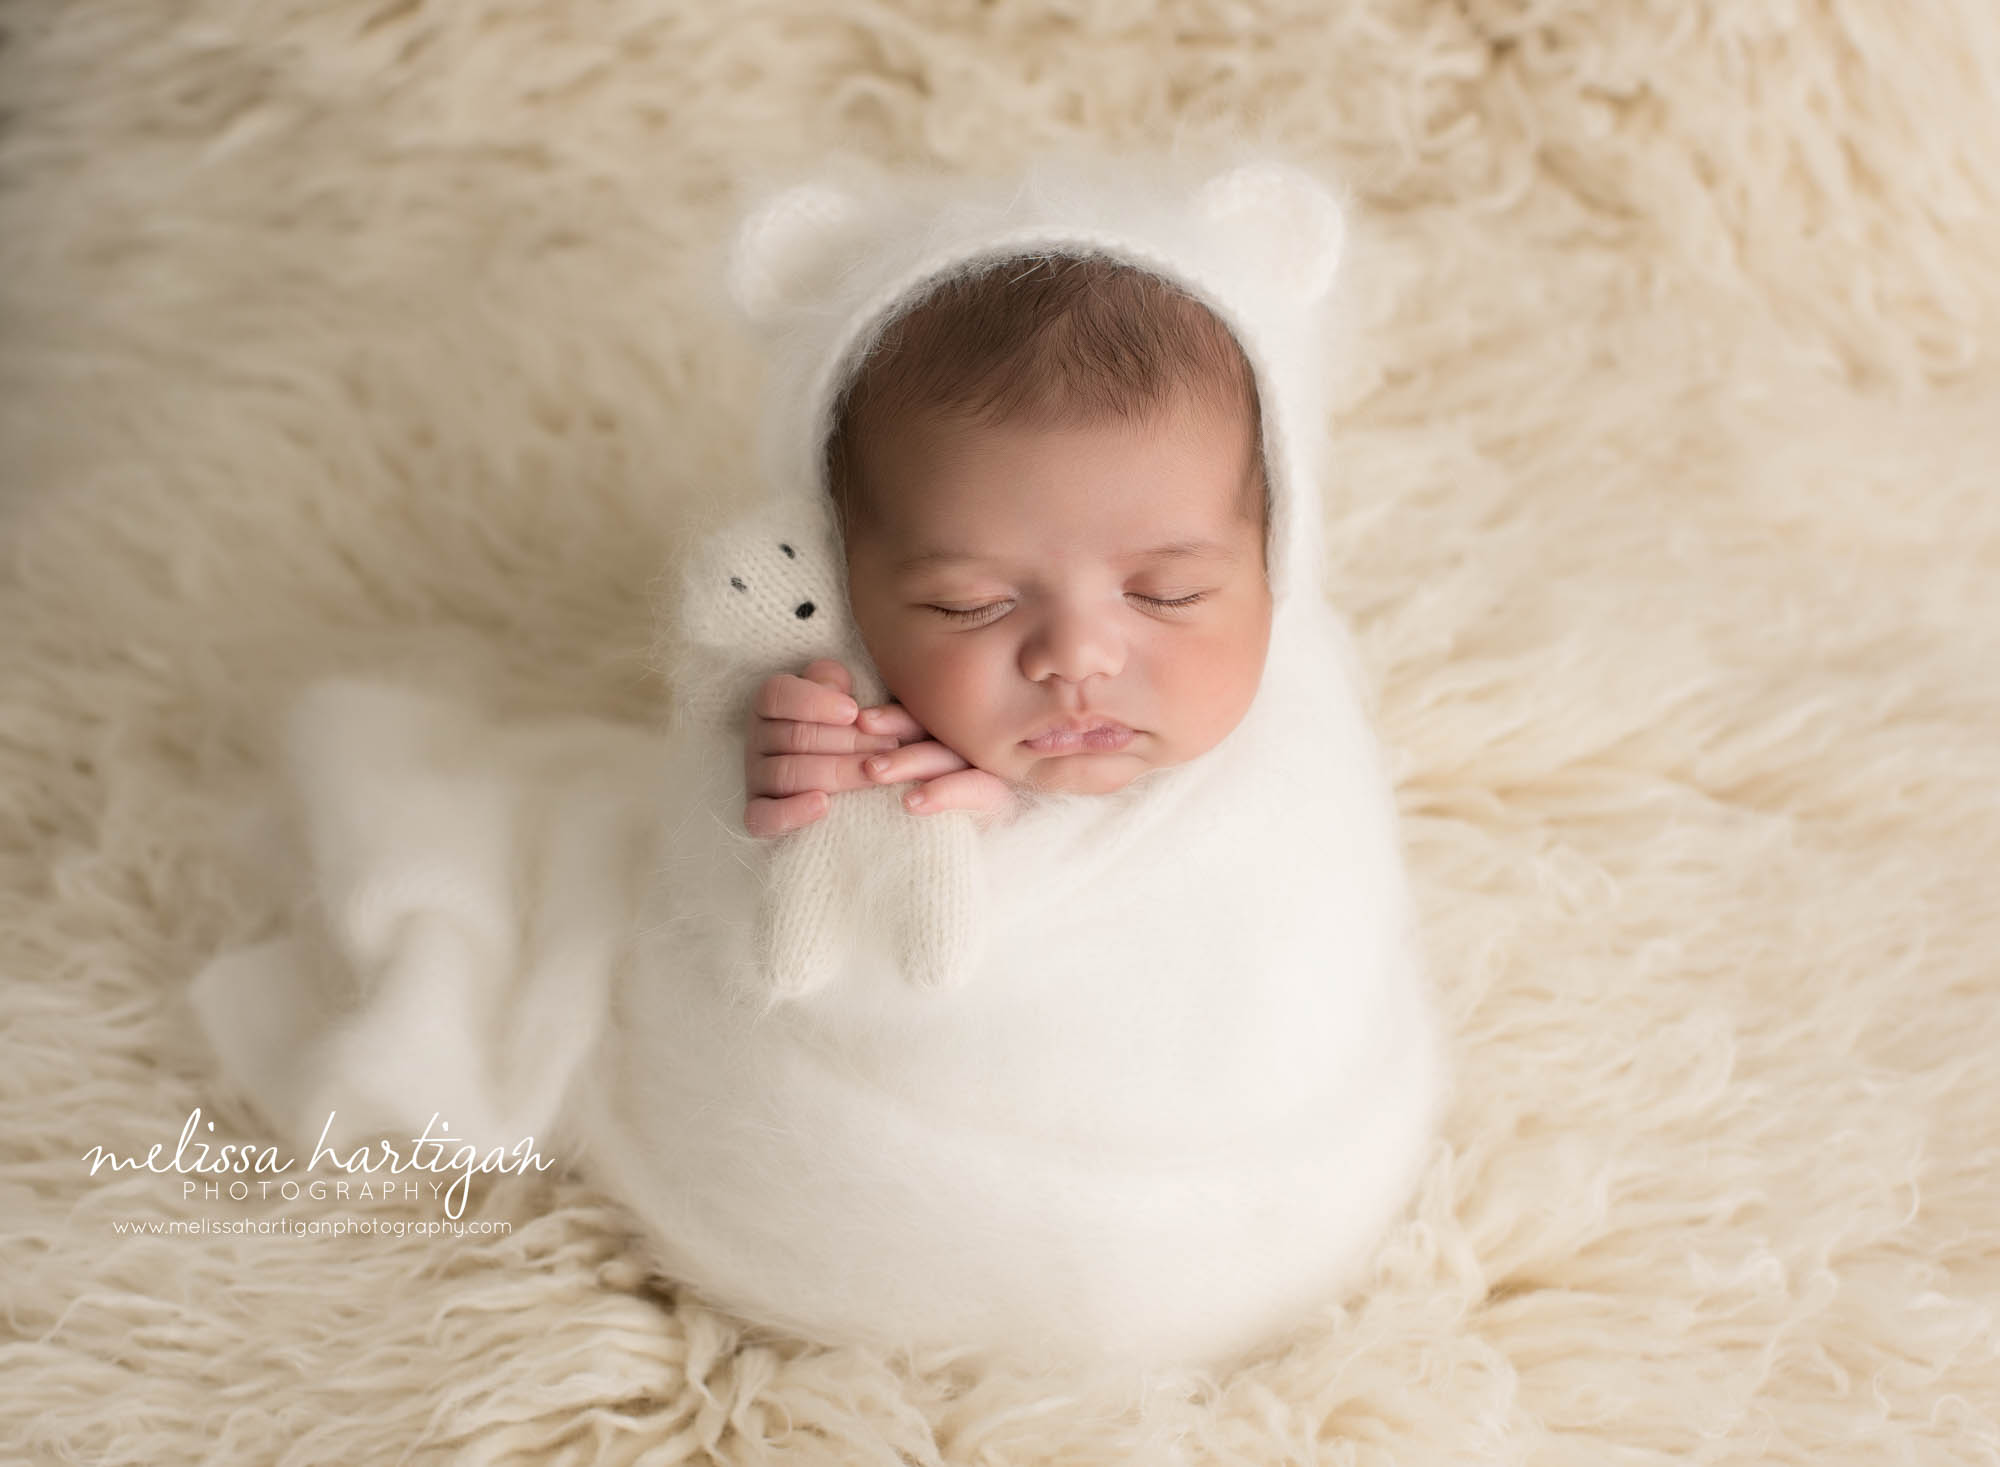 newborn baby boy wrapped inc ream knitted wrap holding knitted teddy bear and wearing matching knitted bear bonnet